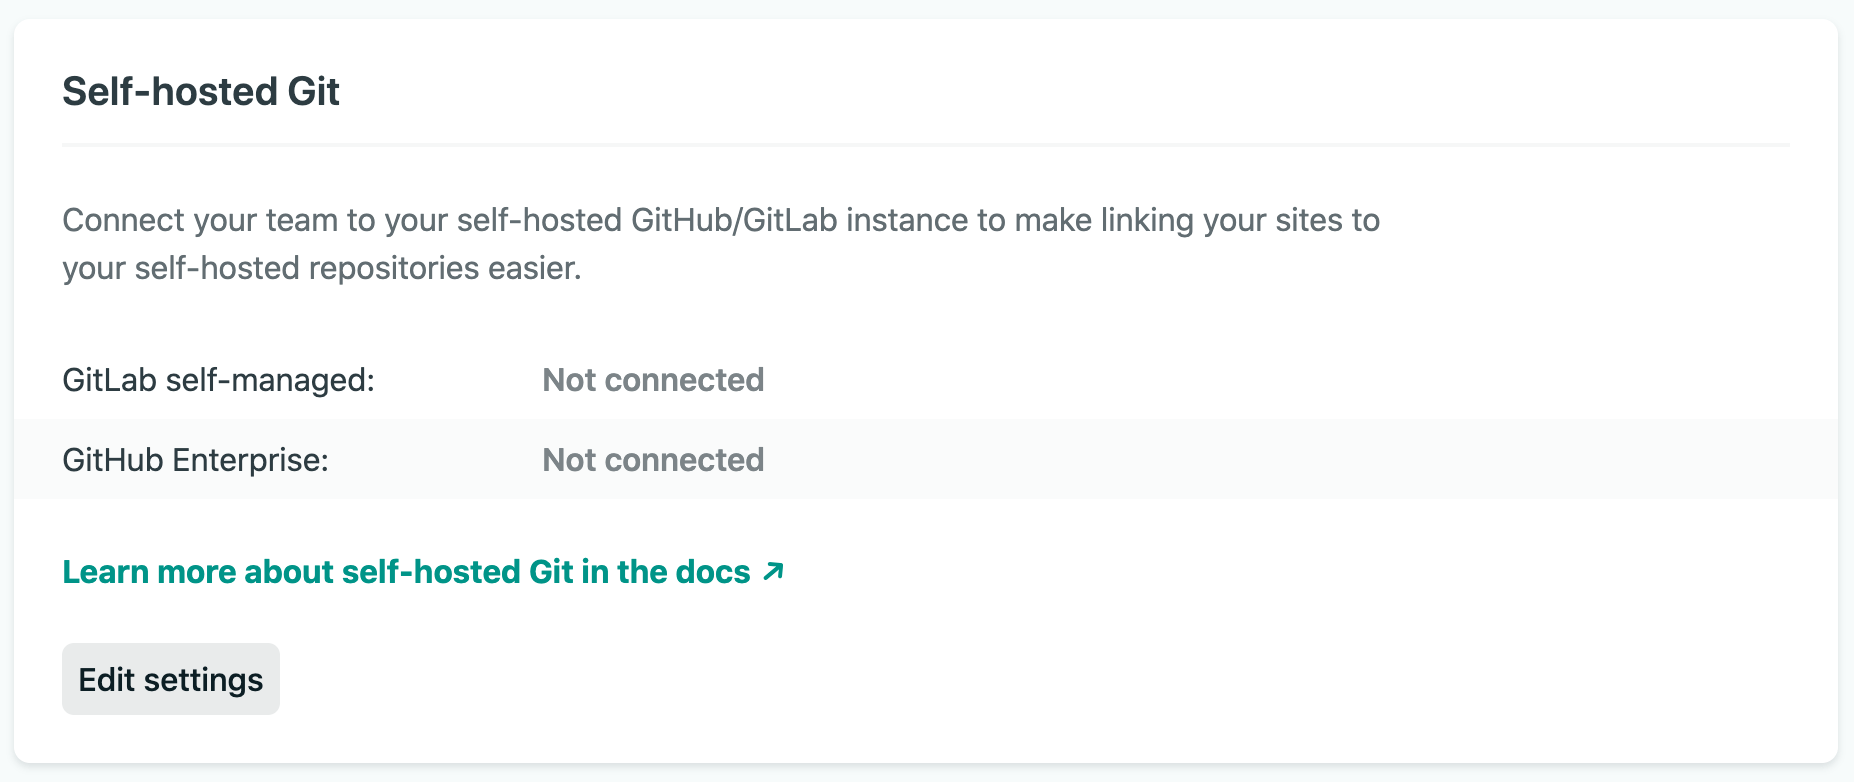 The default state indicates that both GitHub Enterprise Server and GitLab self-managed are "Not connected."